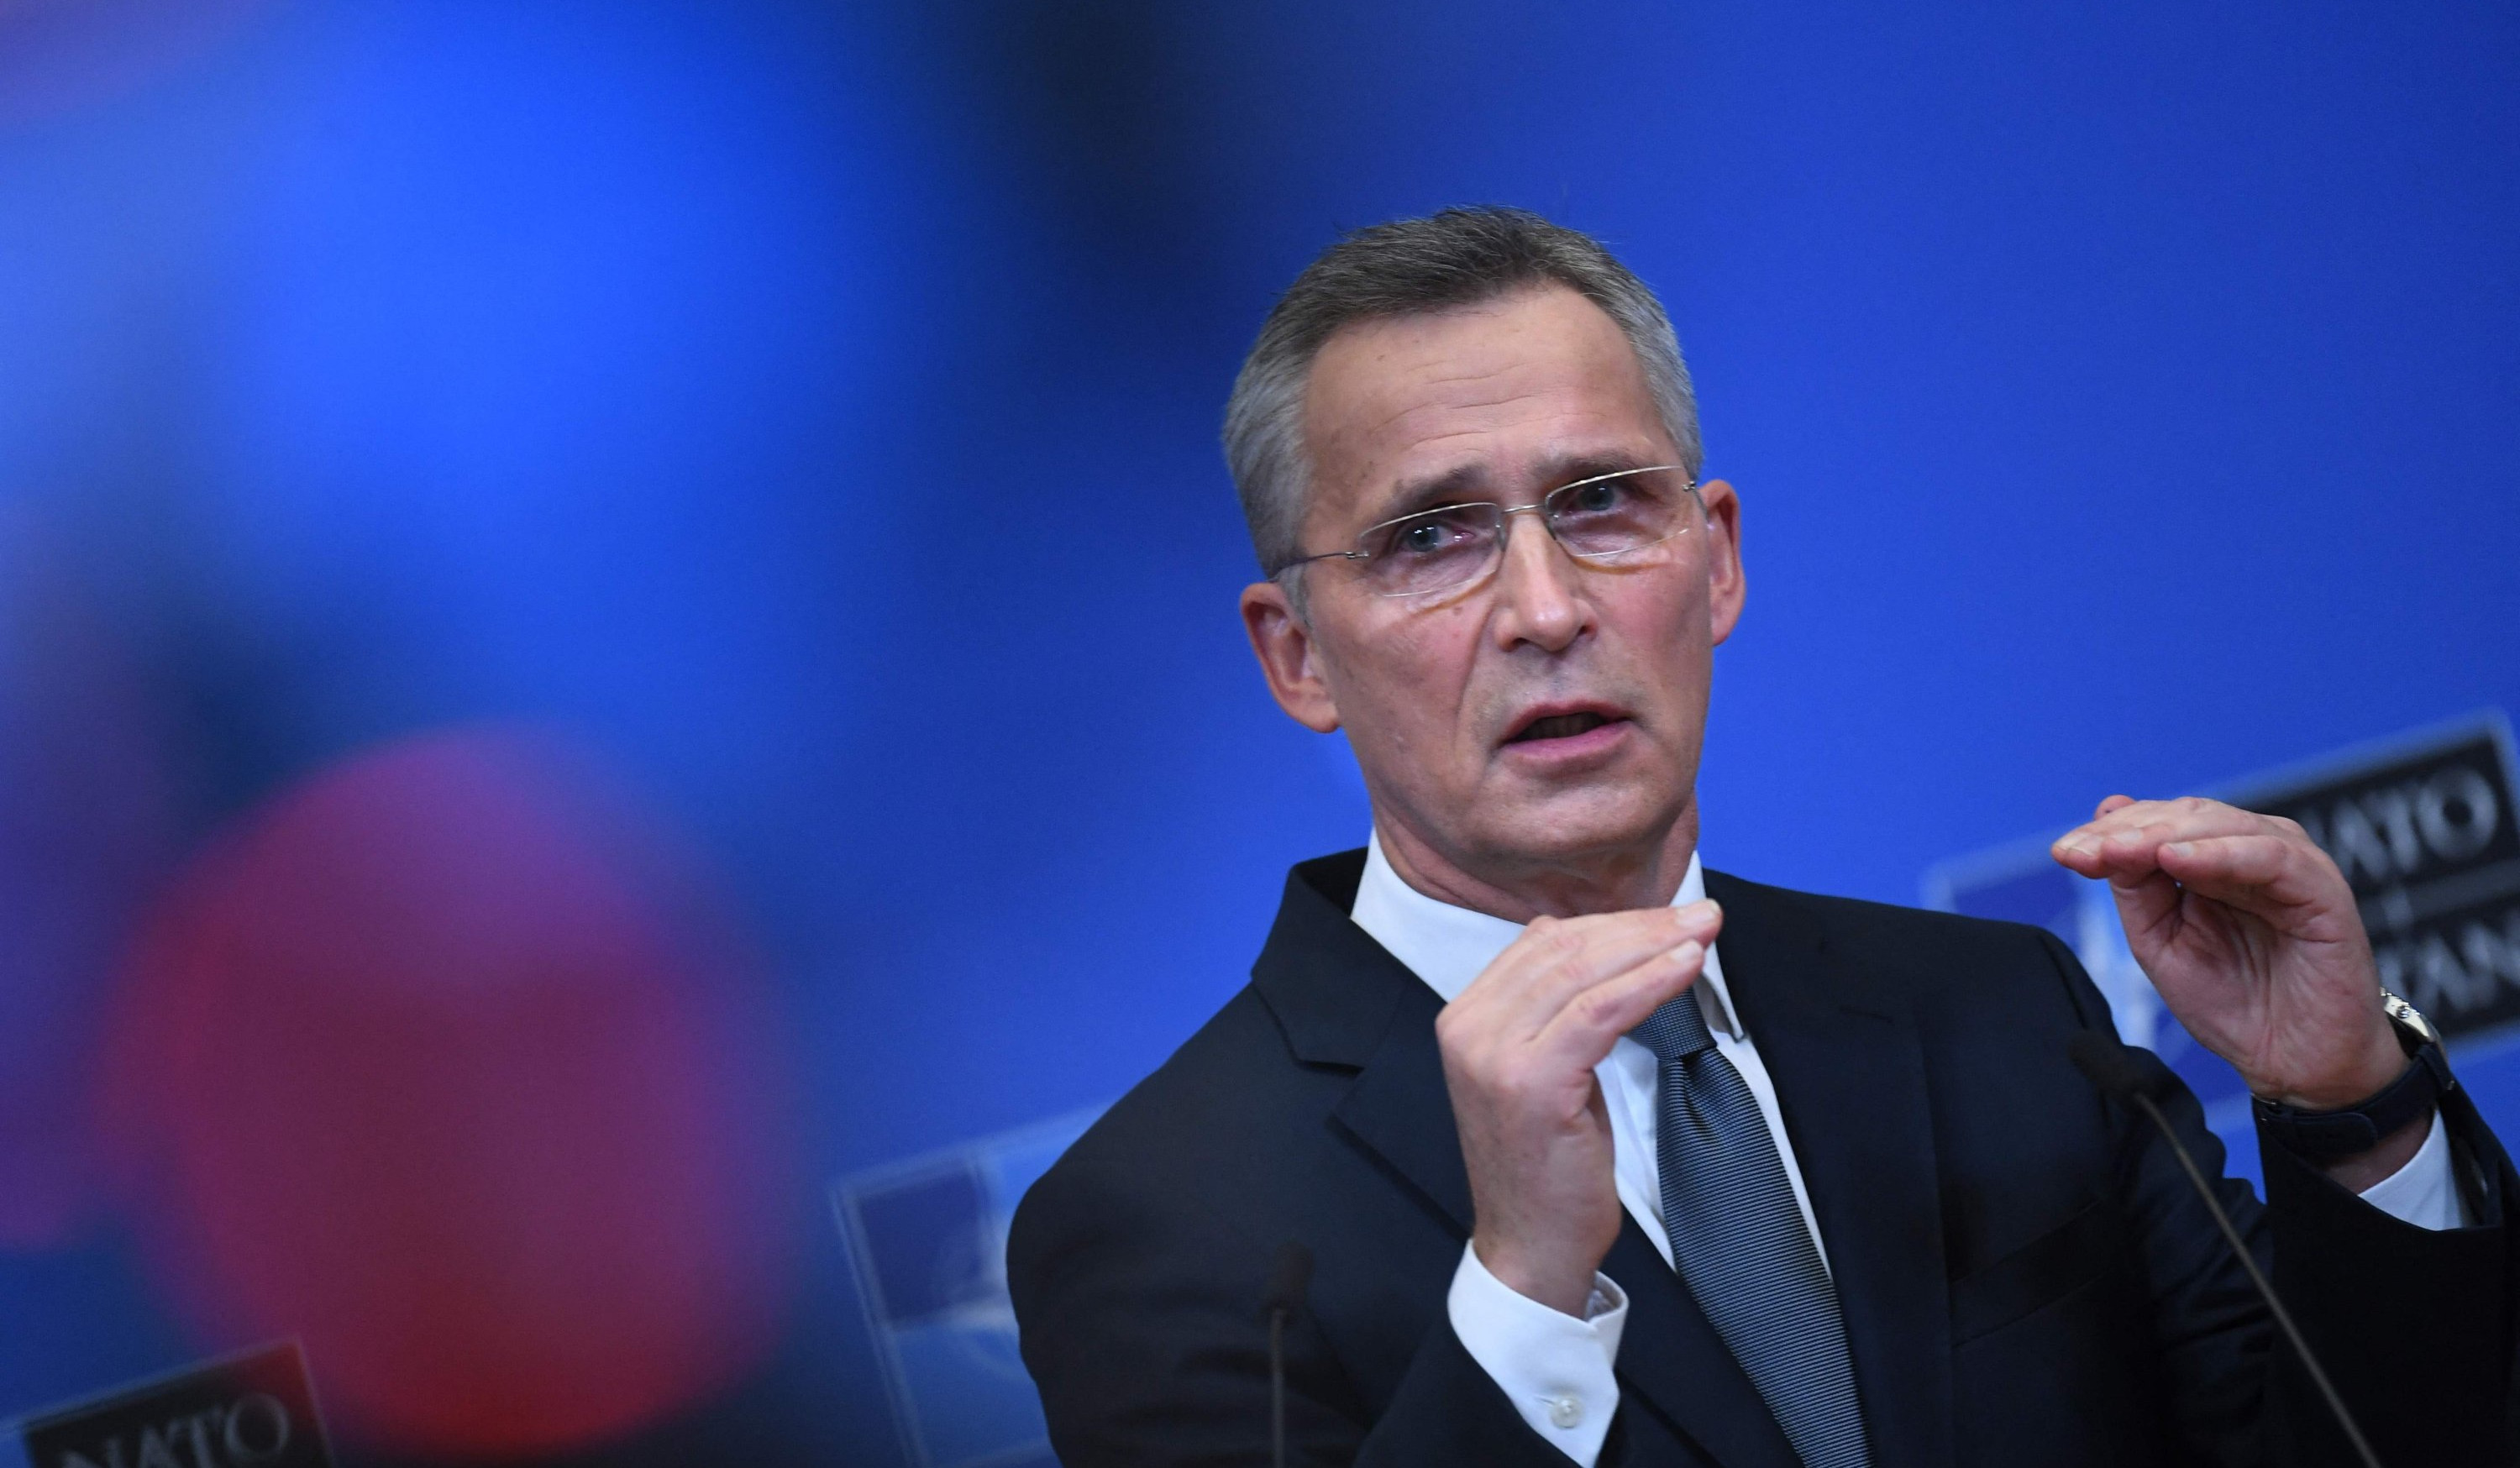 During last few months, Ukrainians managed to inflict great losses on Russian forces: Stoltenberg